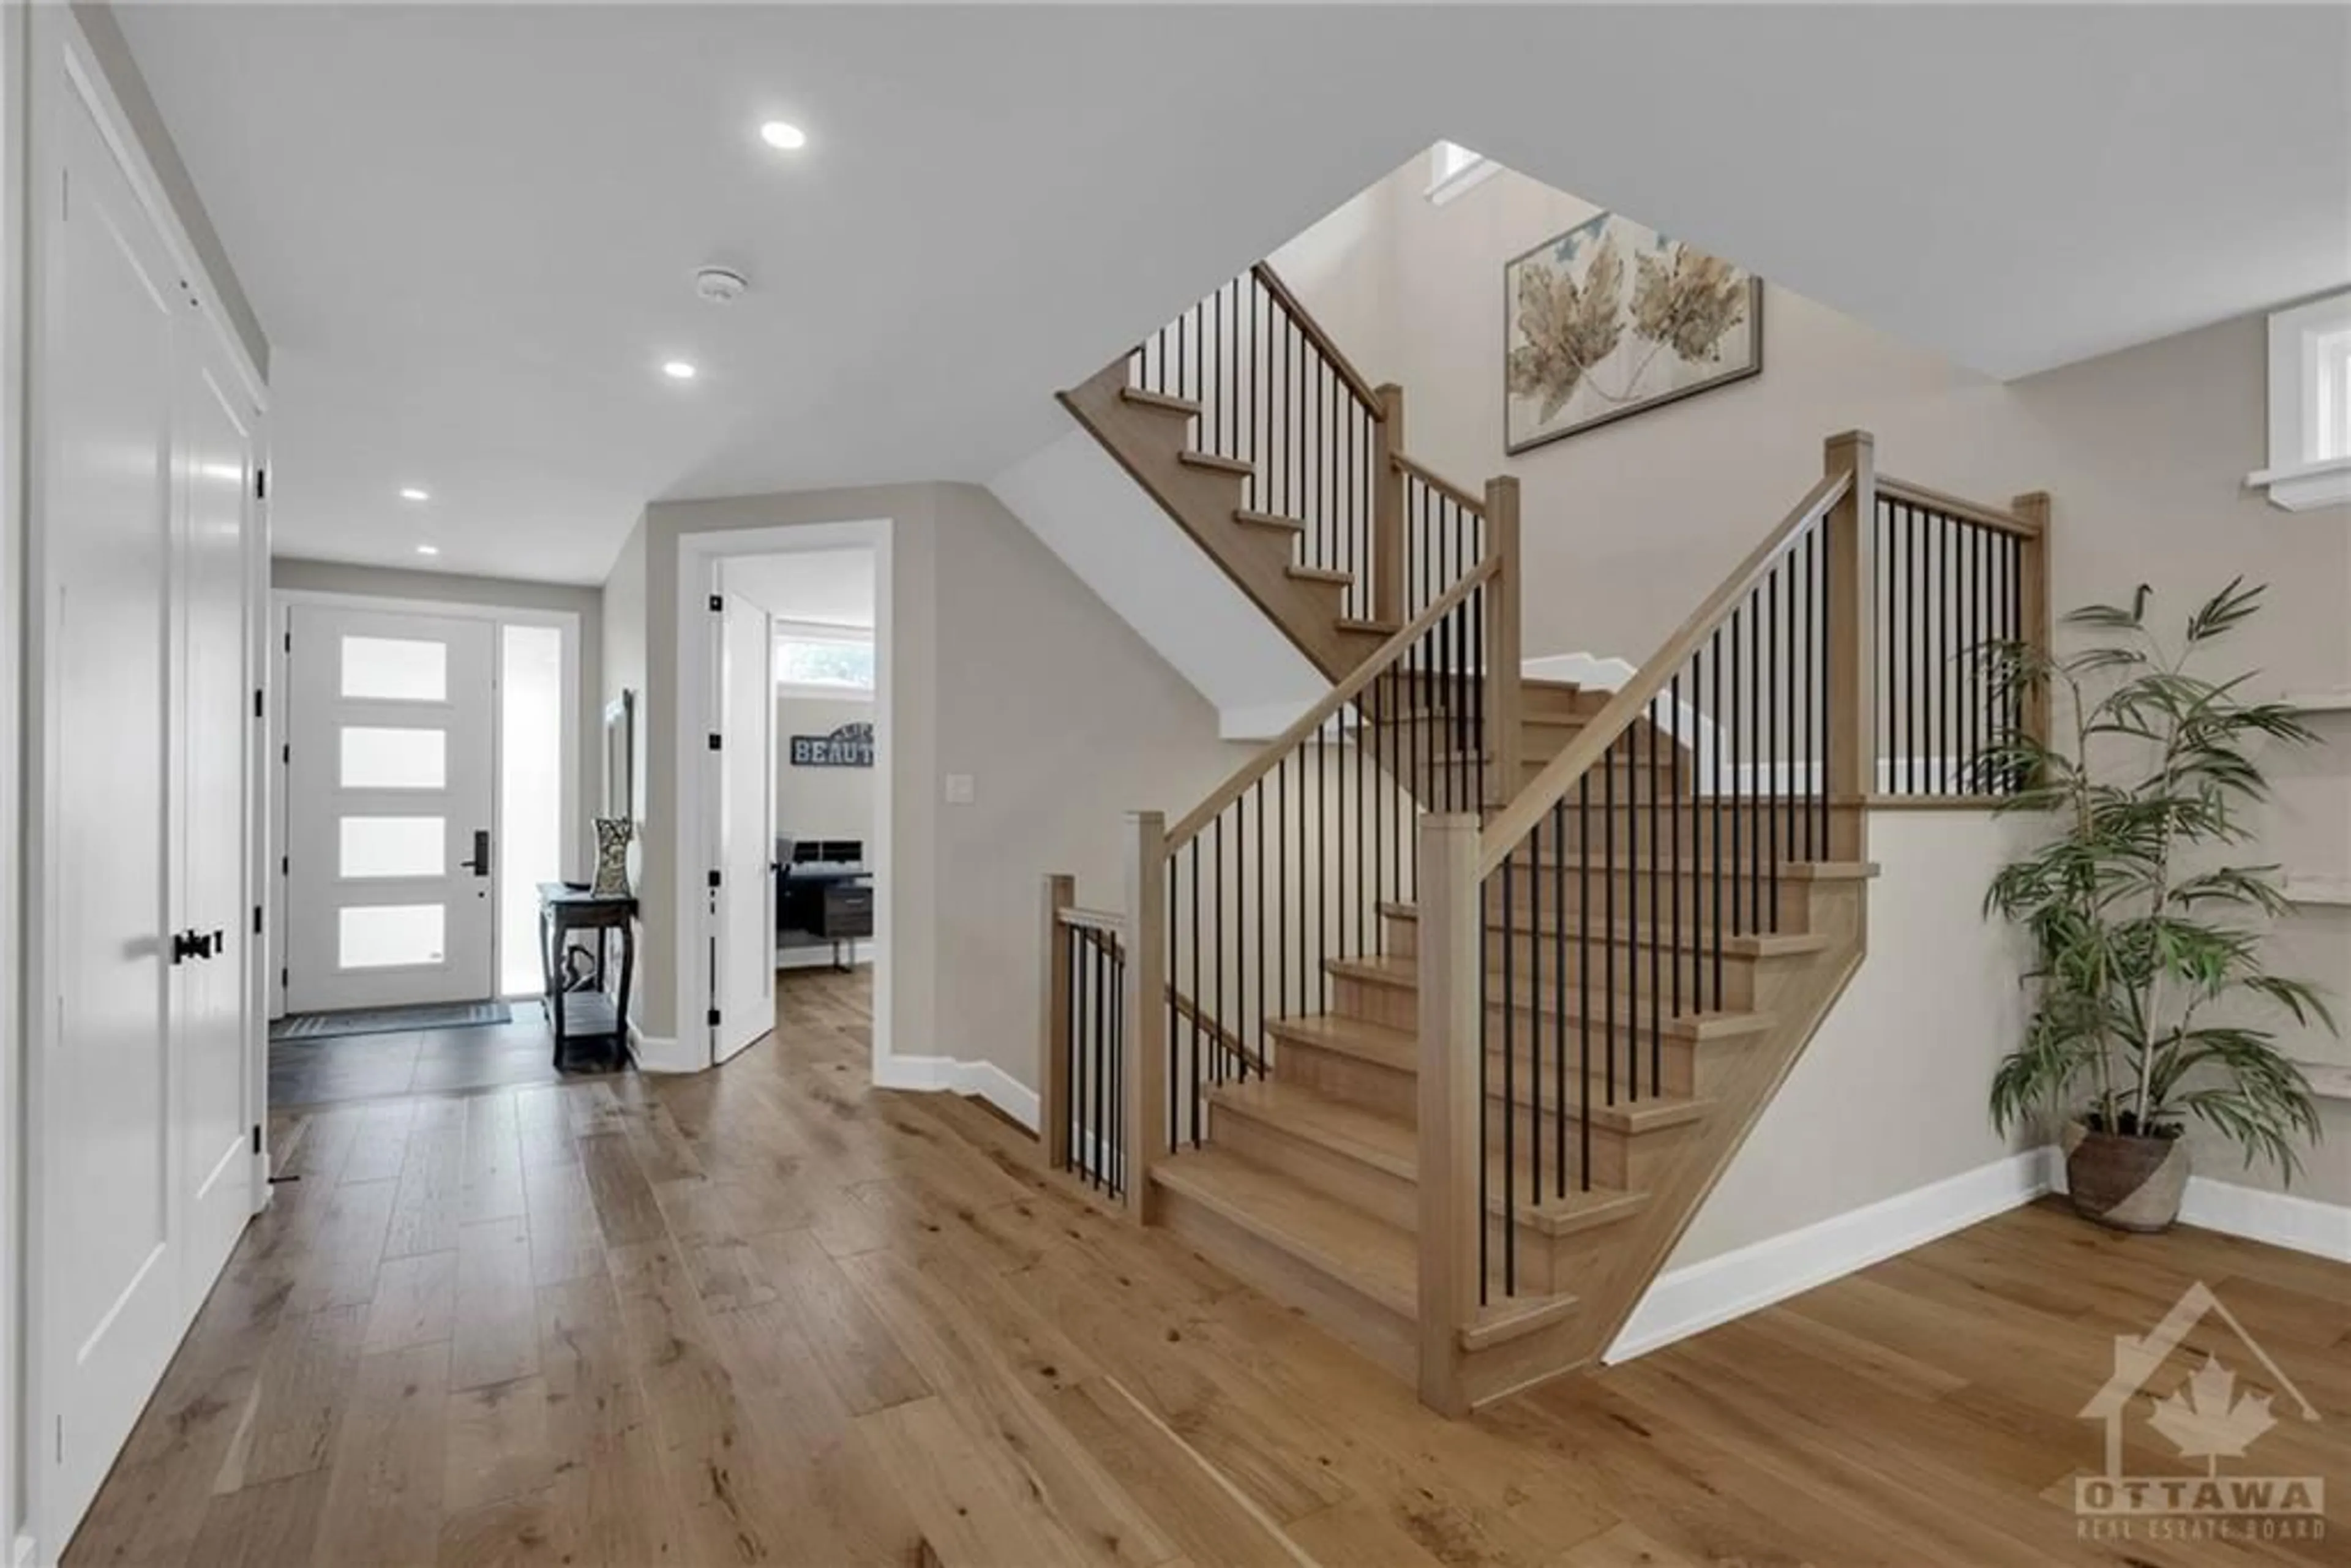 Stairs for 64 ST CLAIRE Ave, Ottawa Ontario K2G 2A4